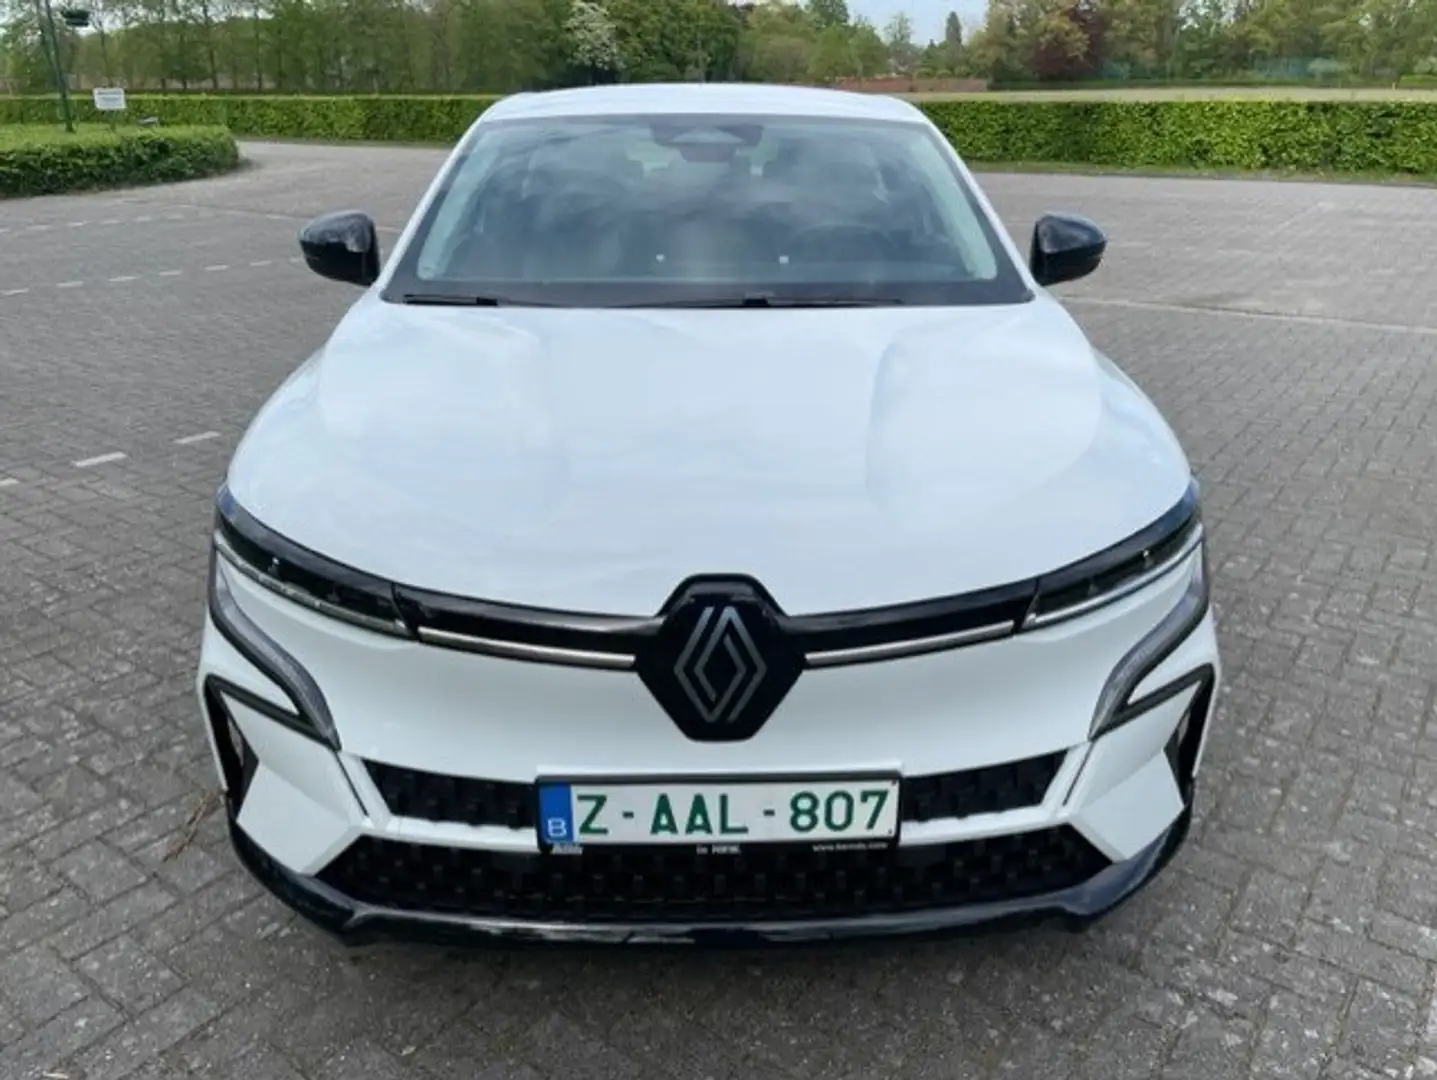 Renault Megane E-Tech 40 kWh Equilibre R130 Standard charge DEMOWAGEN Blanco - 2